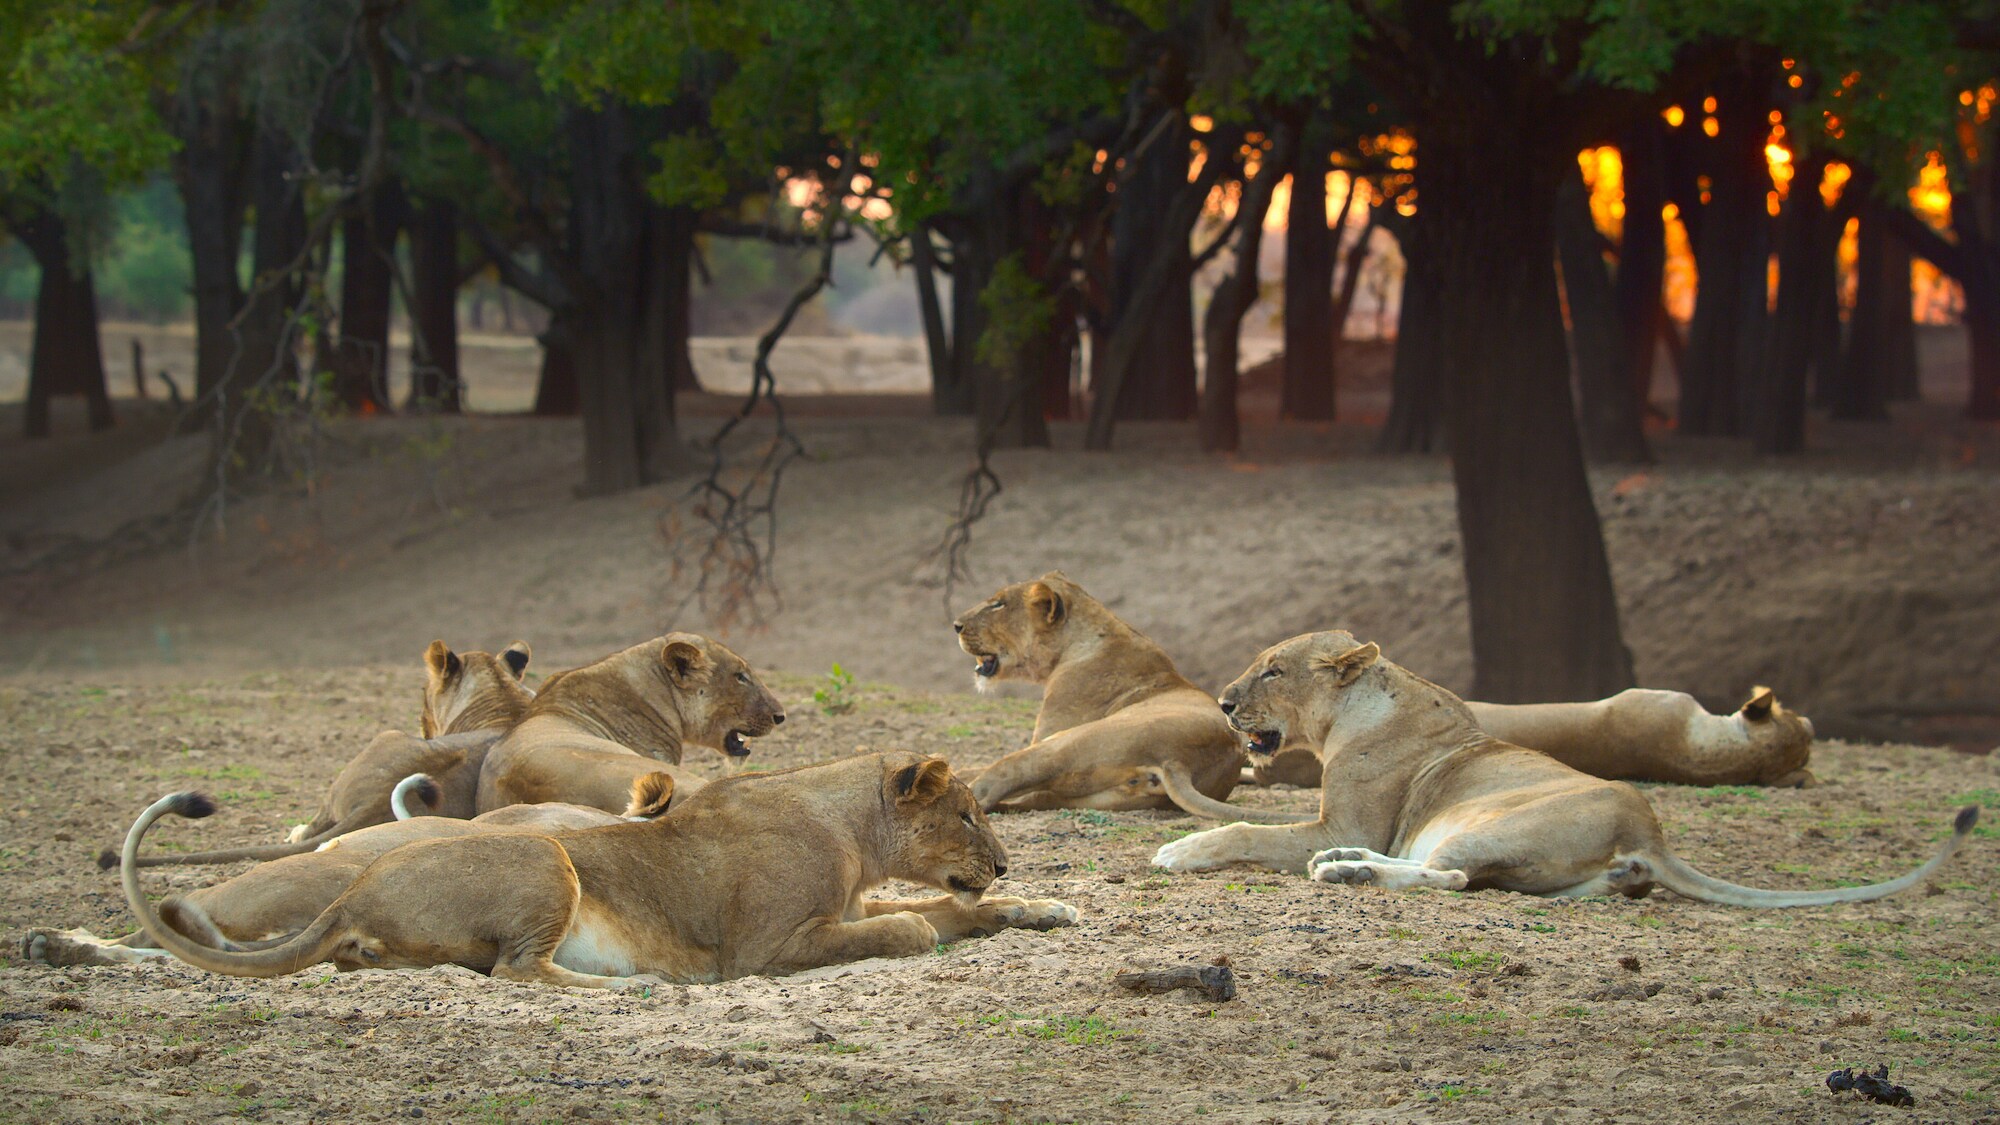 Pride of lions resting together. (Credit: National Geographic/Bertie Gregory for Disney+)